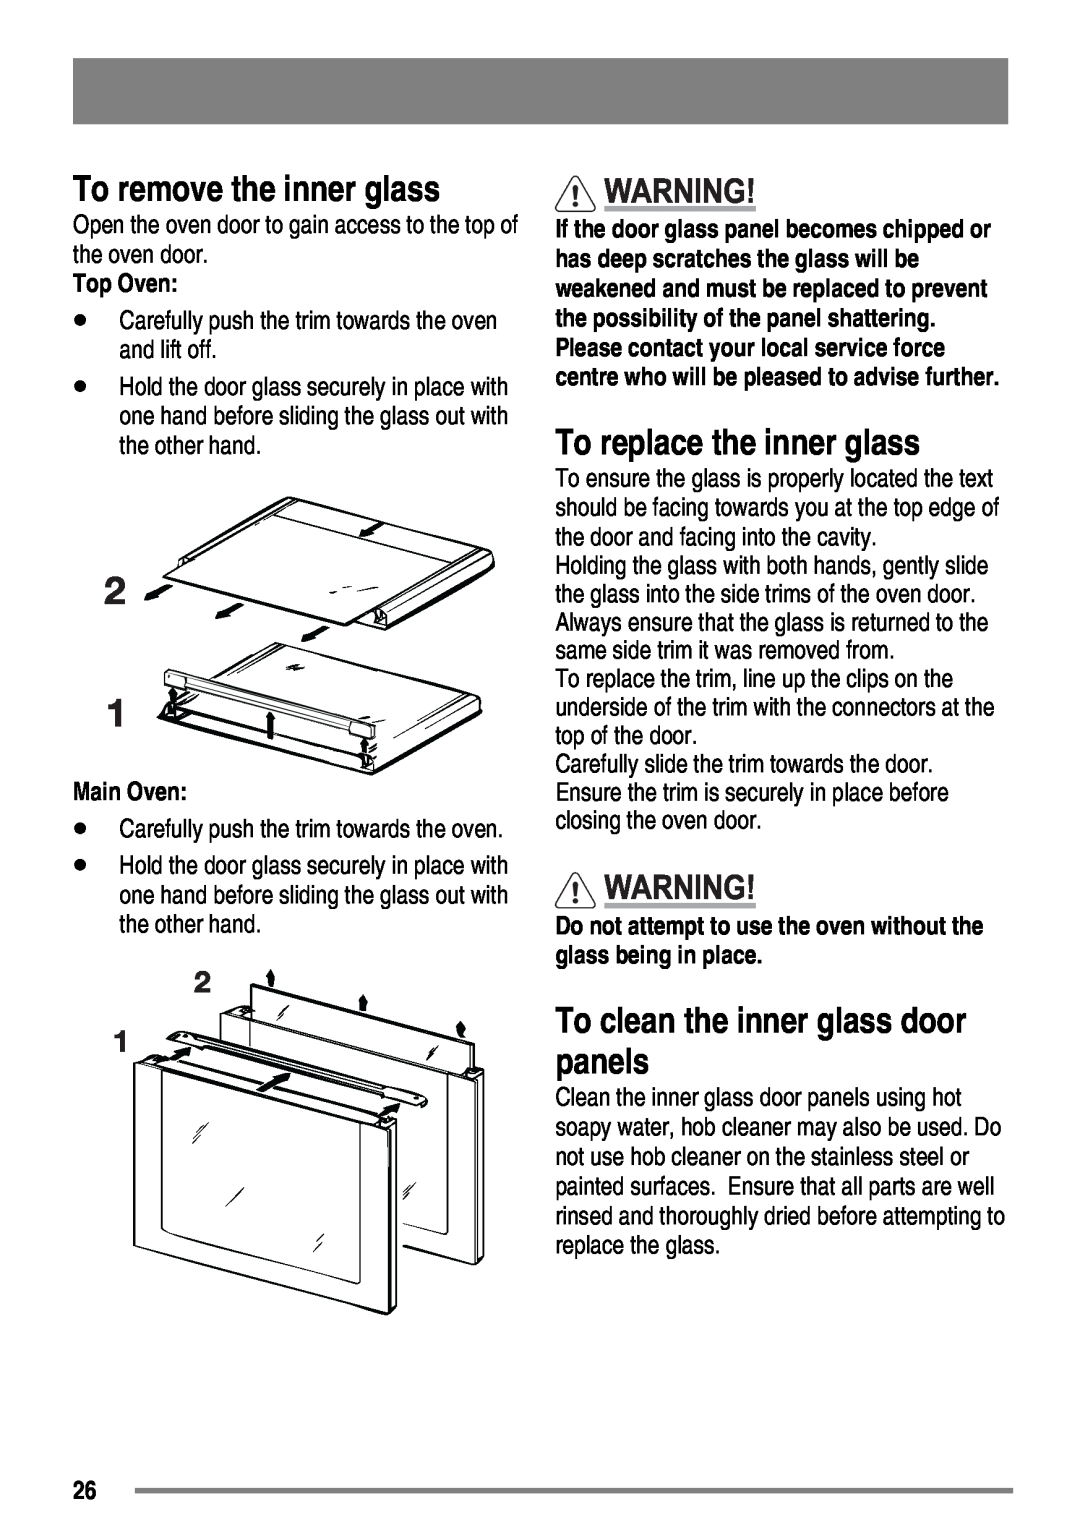 Zanussi ZKG6020 To remove the inner glass, To replace the inner glass, To clean the inner glass door panels, Top Oven 